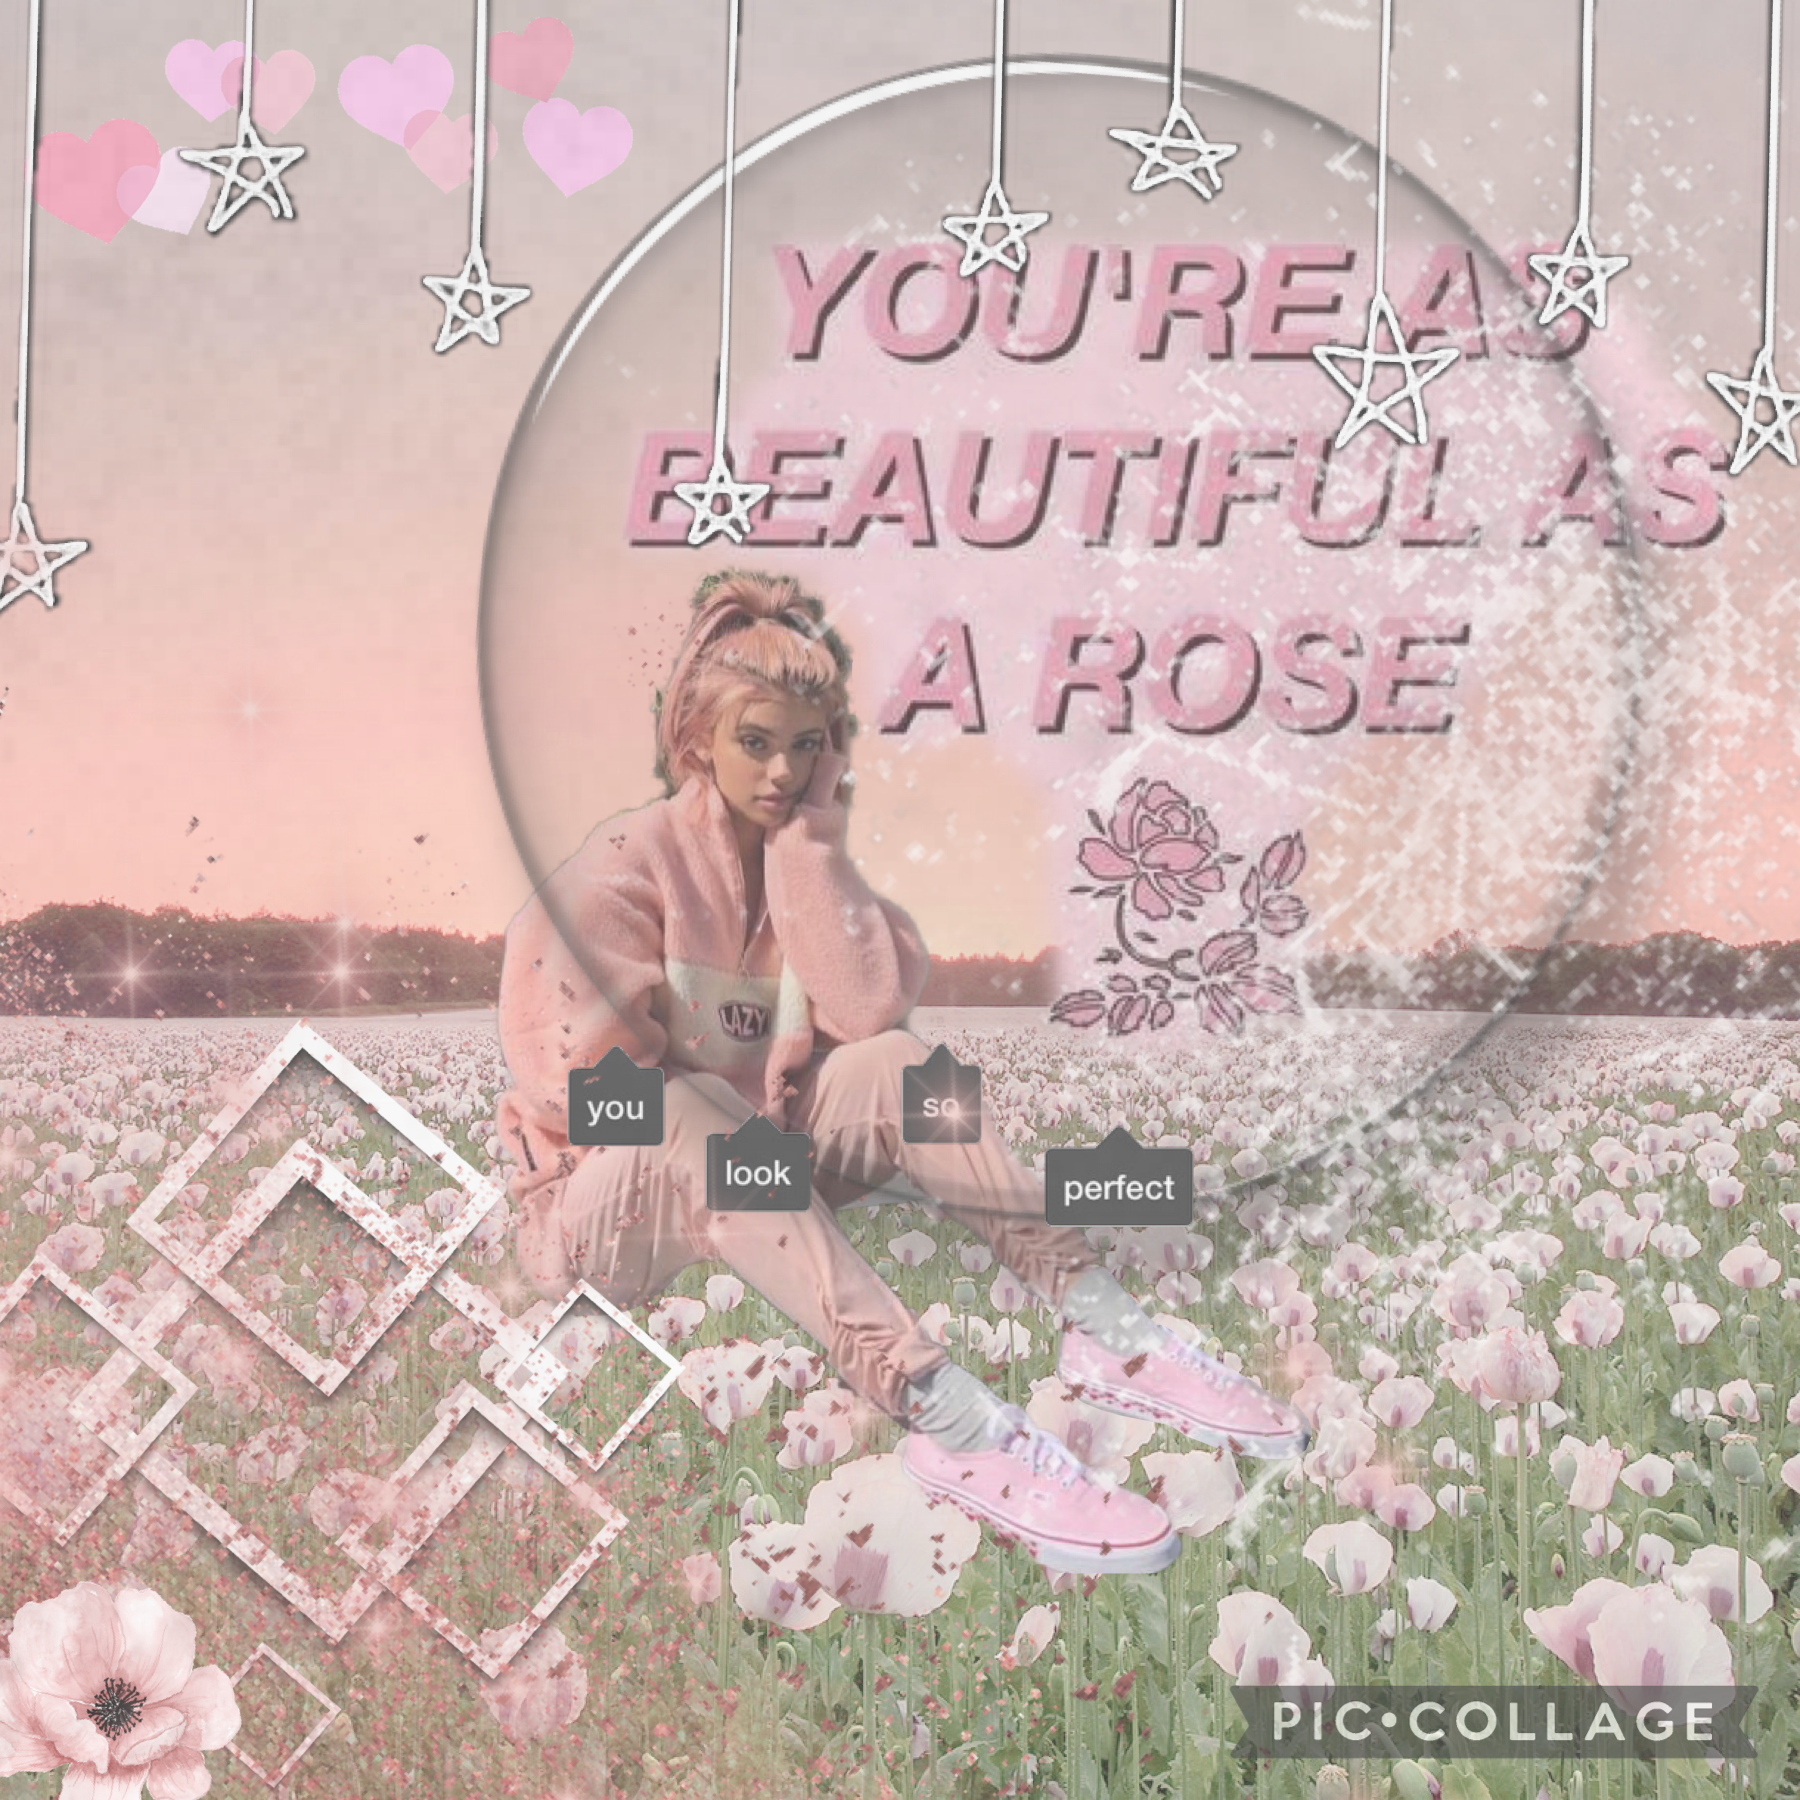 • beauty of roses •
hey y’all! hru? you’re a s beautiful as a rose 😉 
💗✨ love ya! ✨💗
8.18.21